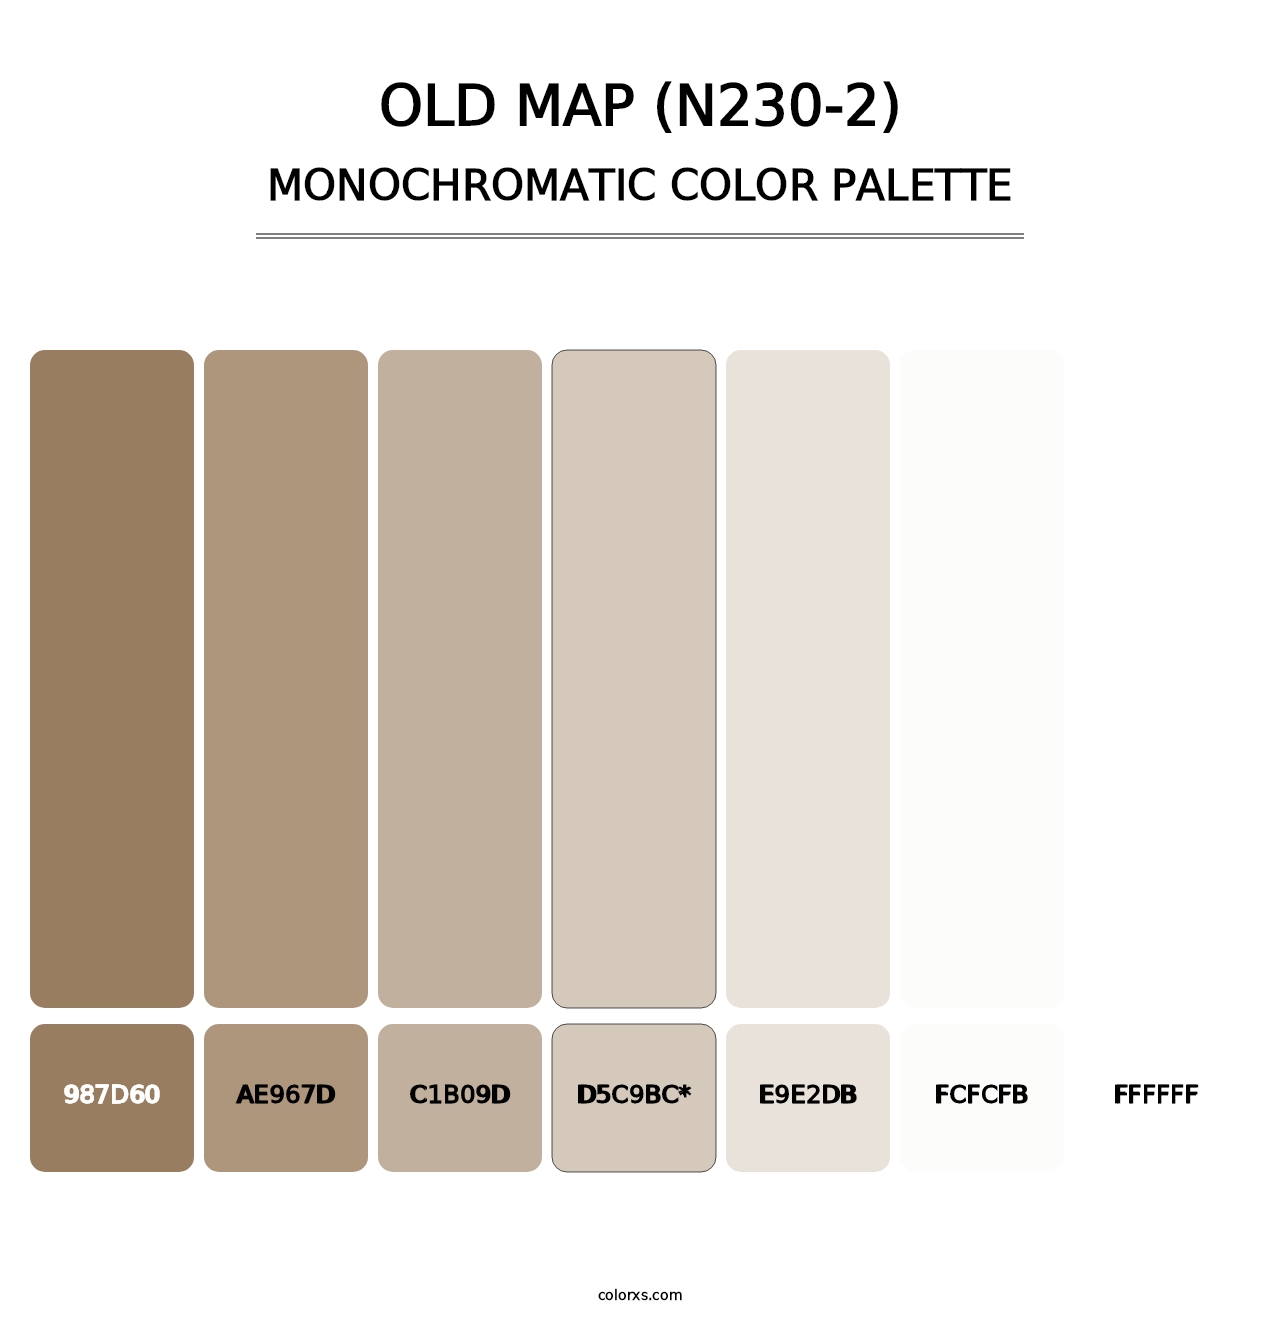 Old Map (N230-2) - Monochromatic Color Palette